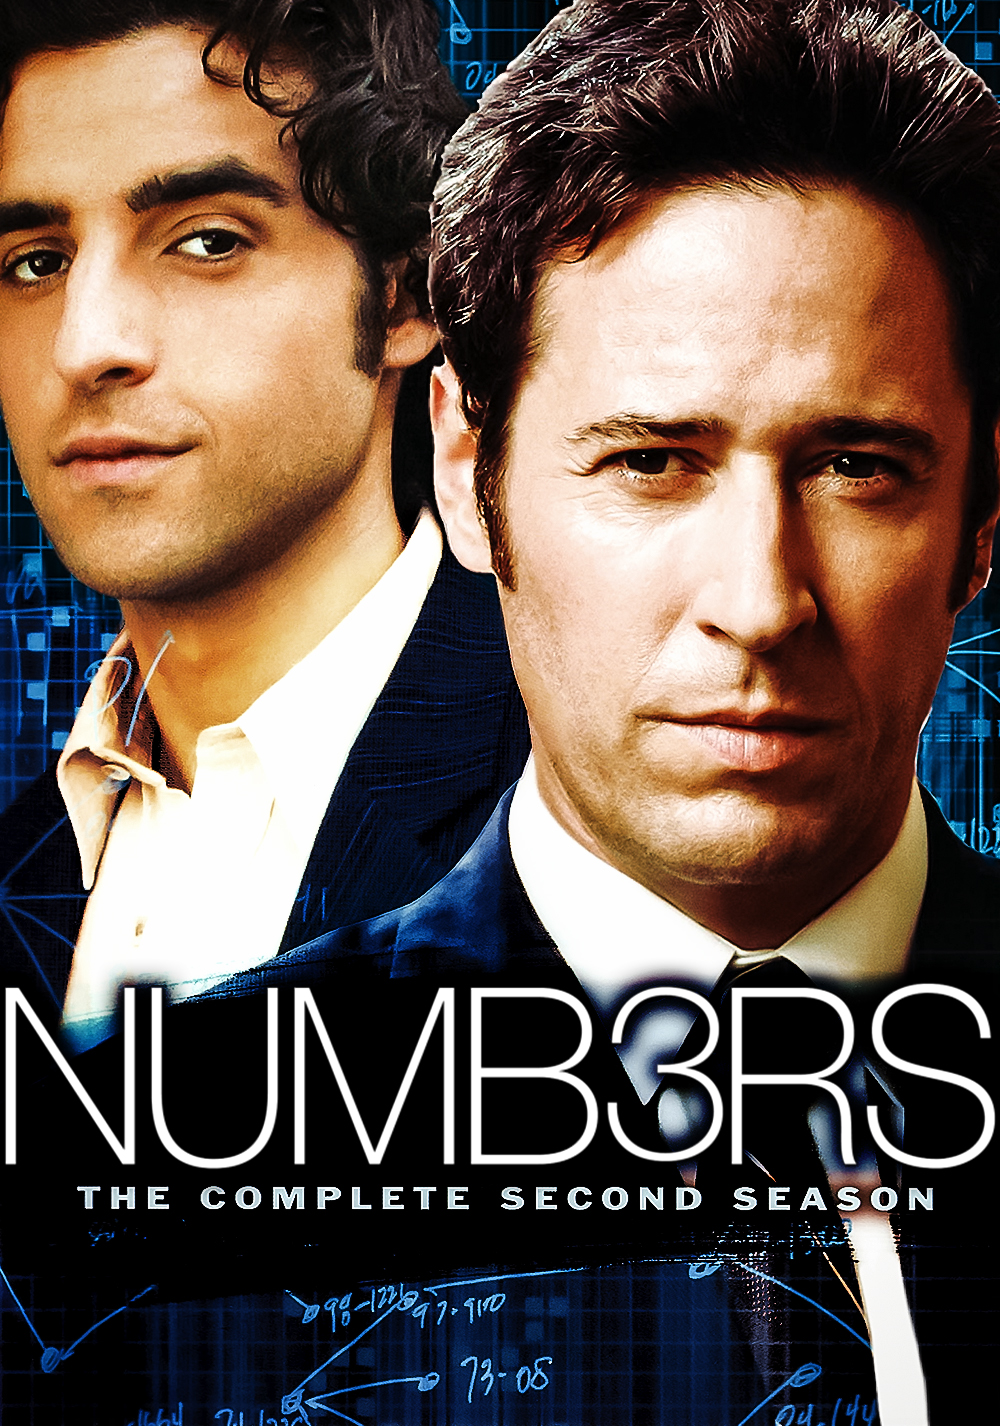 Numb3Rs Wallpapers